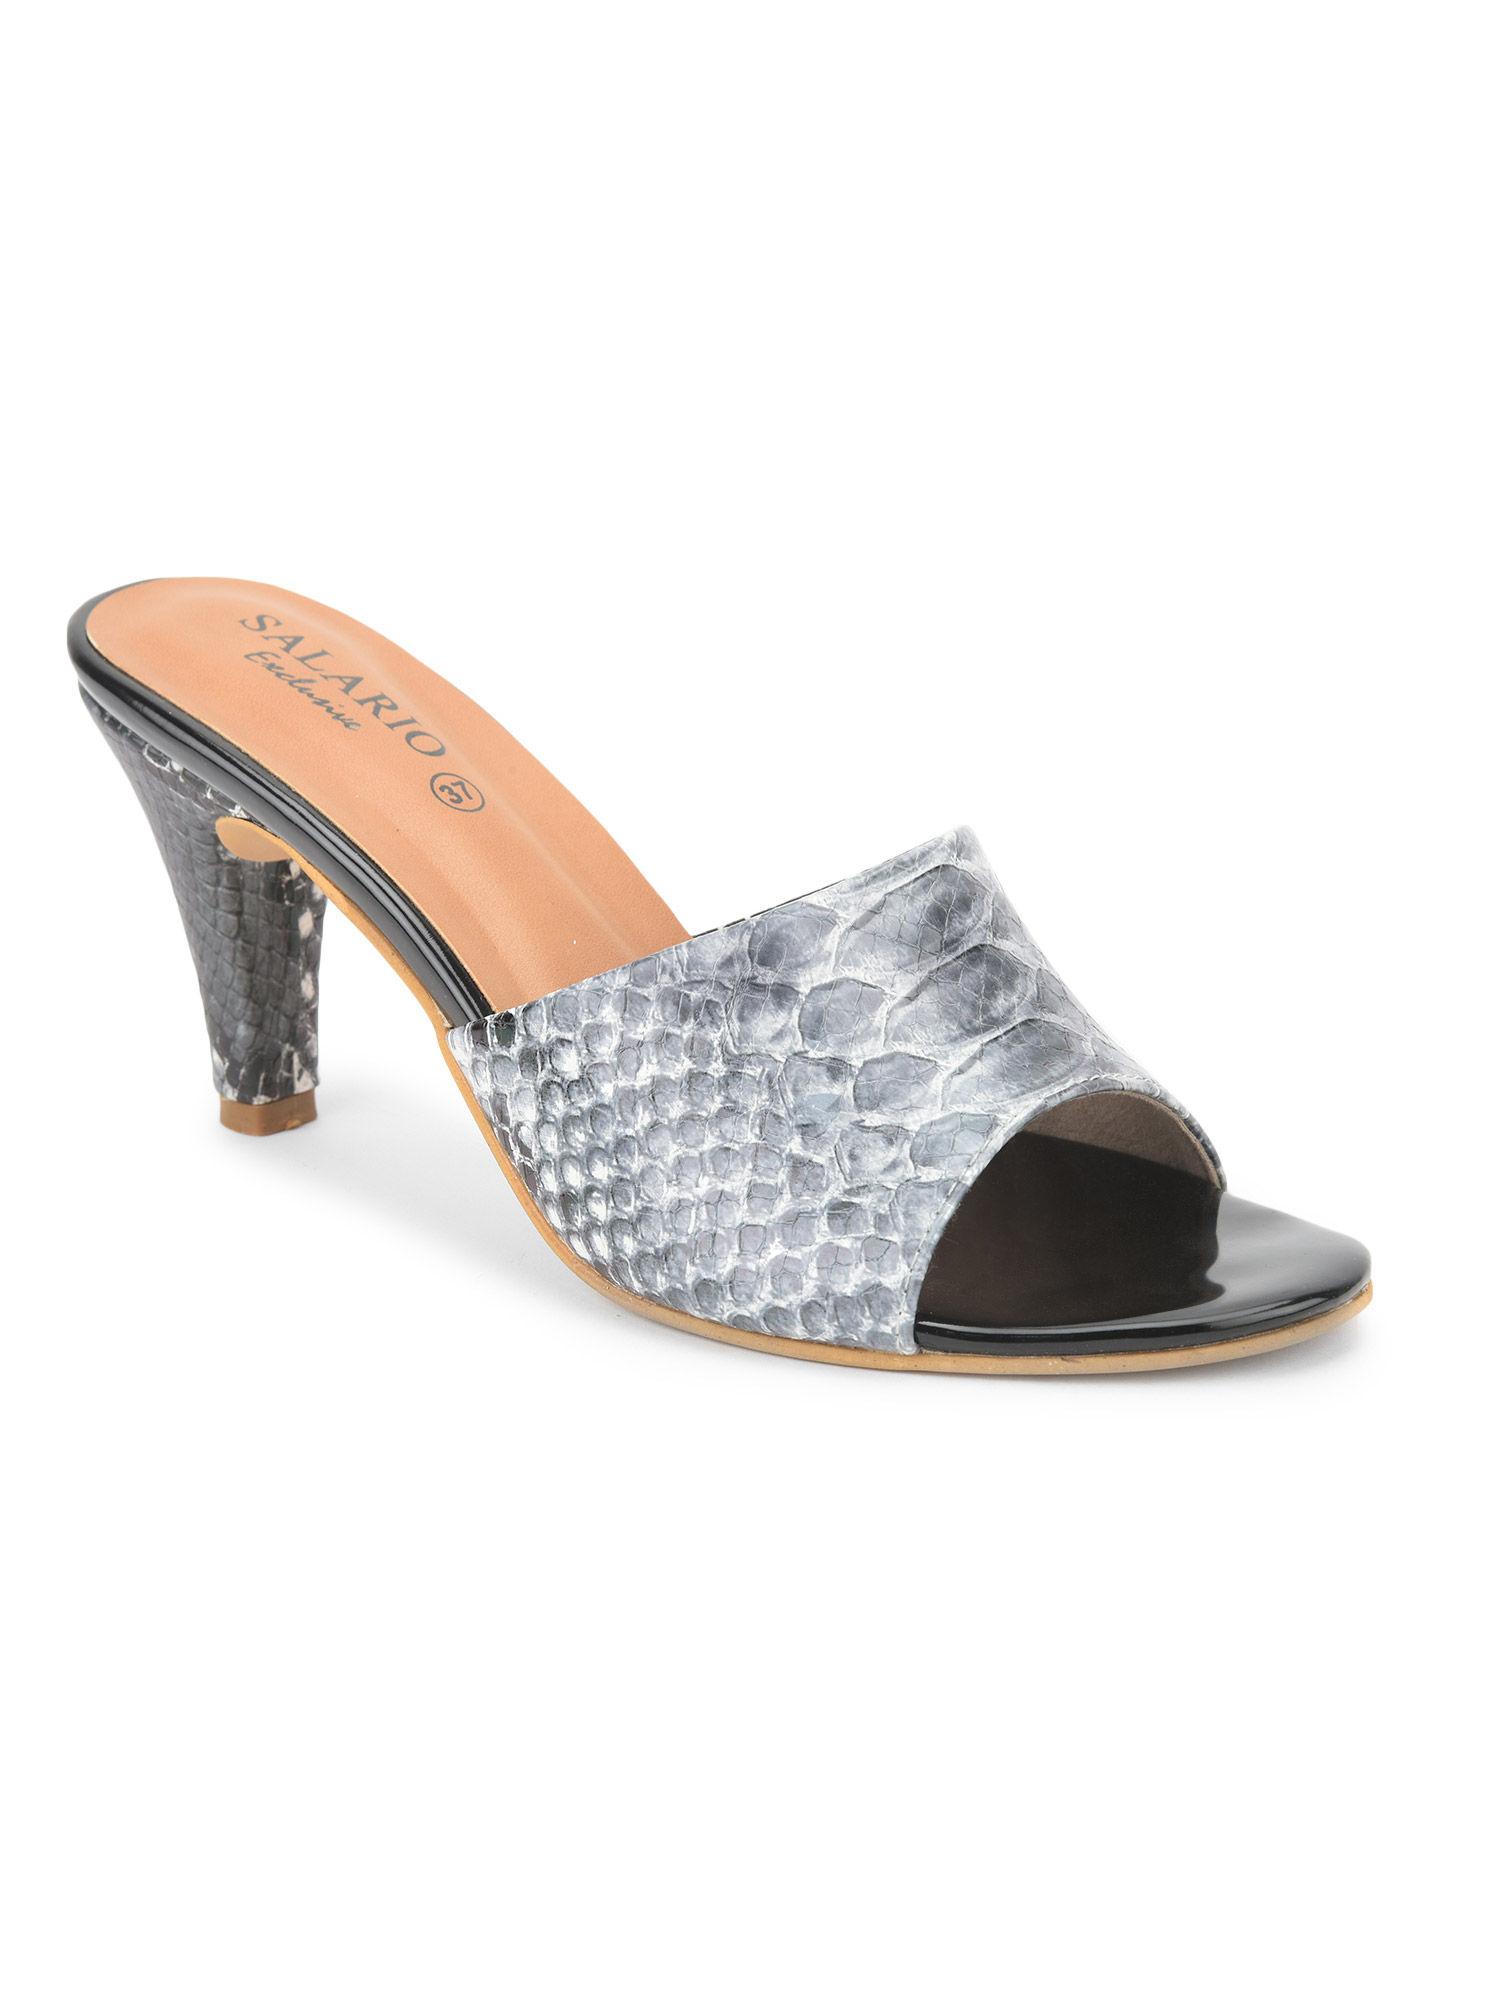 reptilian print pointed-toe chunky heeled grey sandals